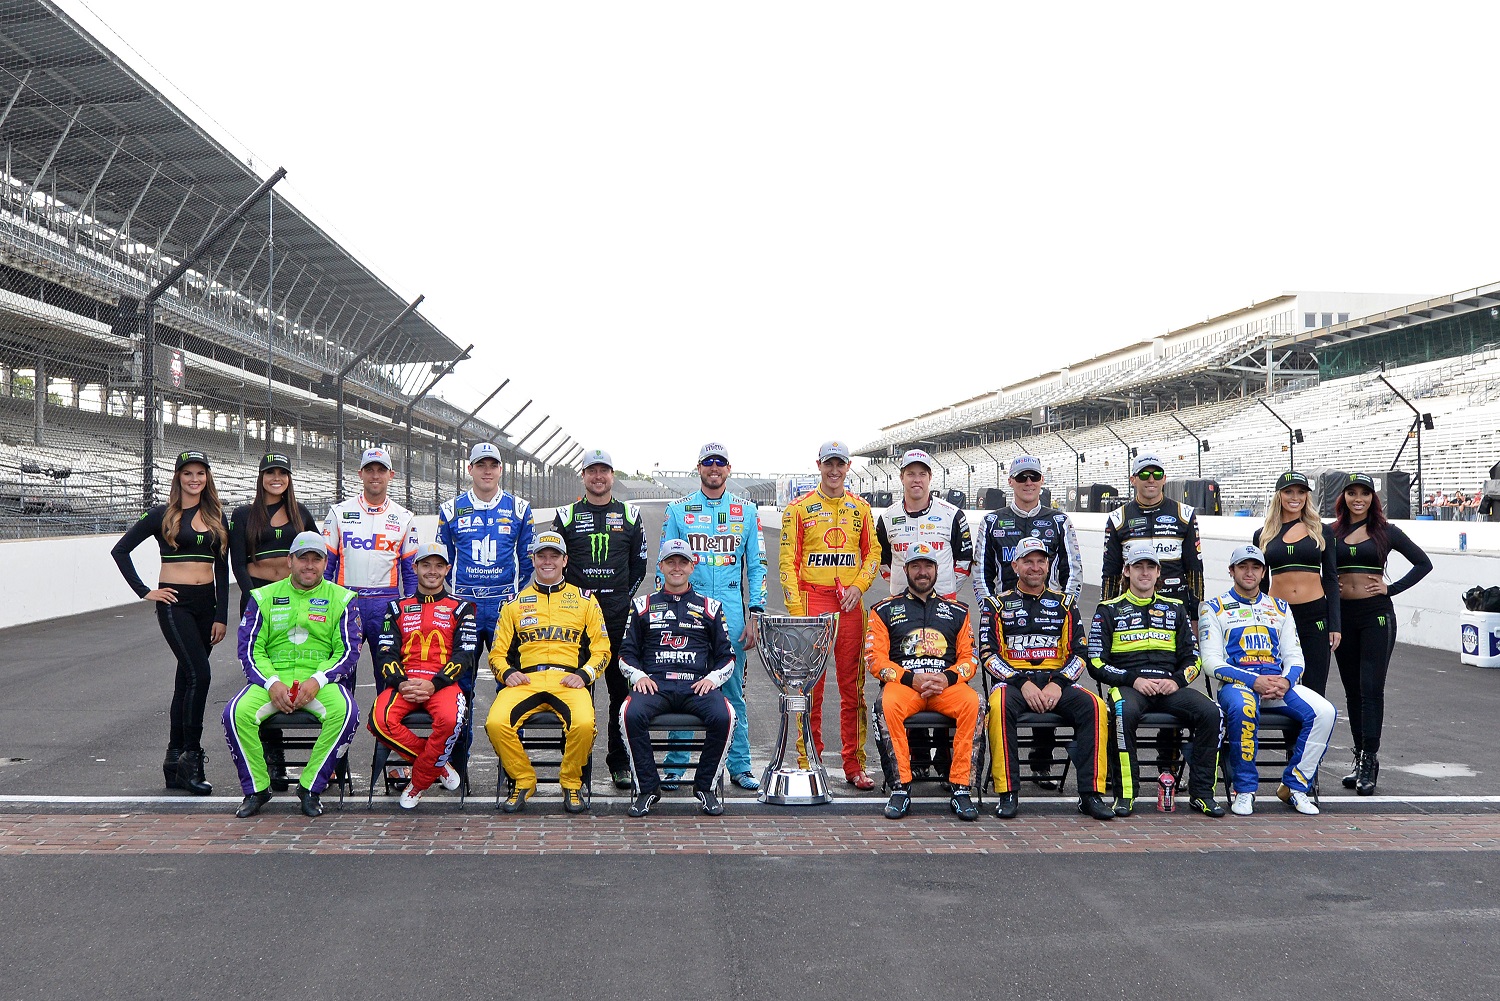 NASCAR assembled Cup Series playoff drivers for a group photo in the pre-pandemic days. This one was taken on Sept. 8, 2019, at the Indianapolis Motor Speedway. | Michael Allio/Icon Sportswire via Getty Images